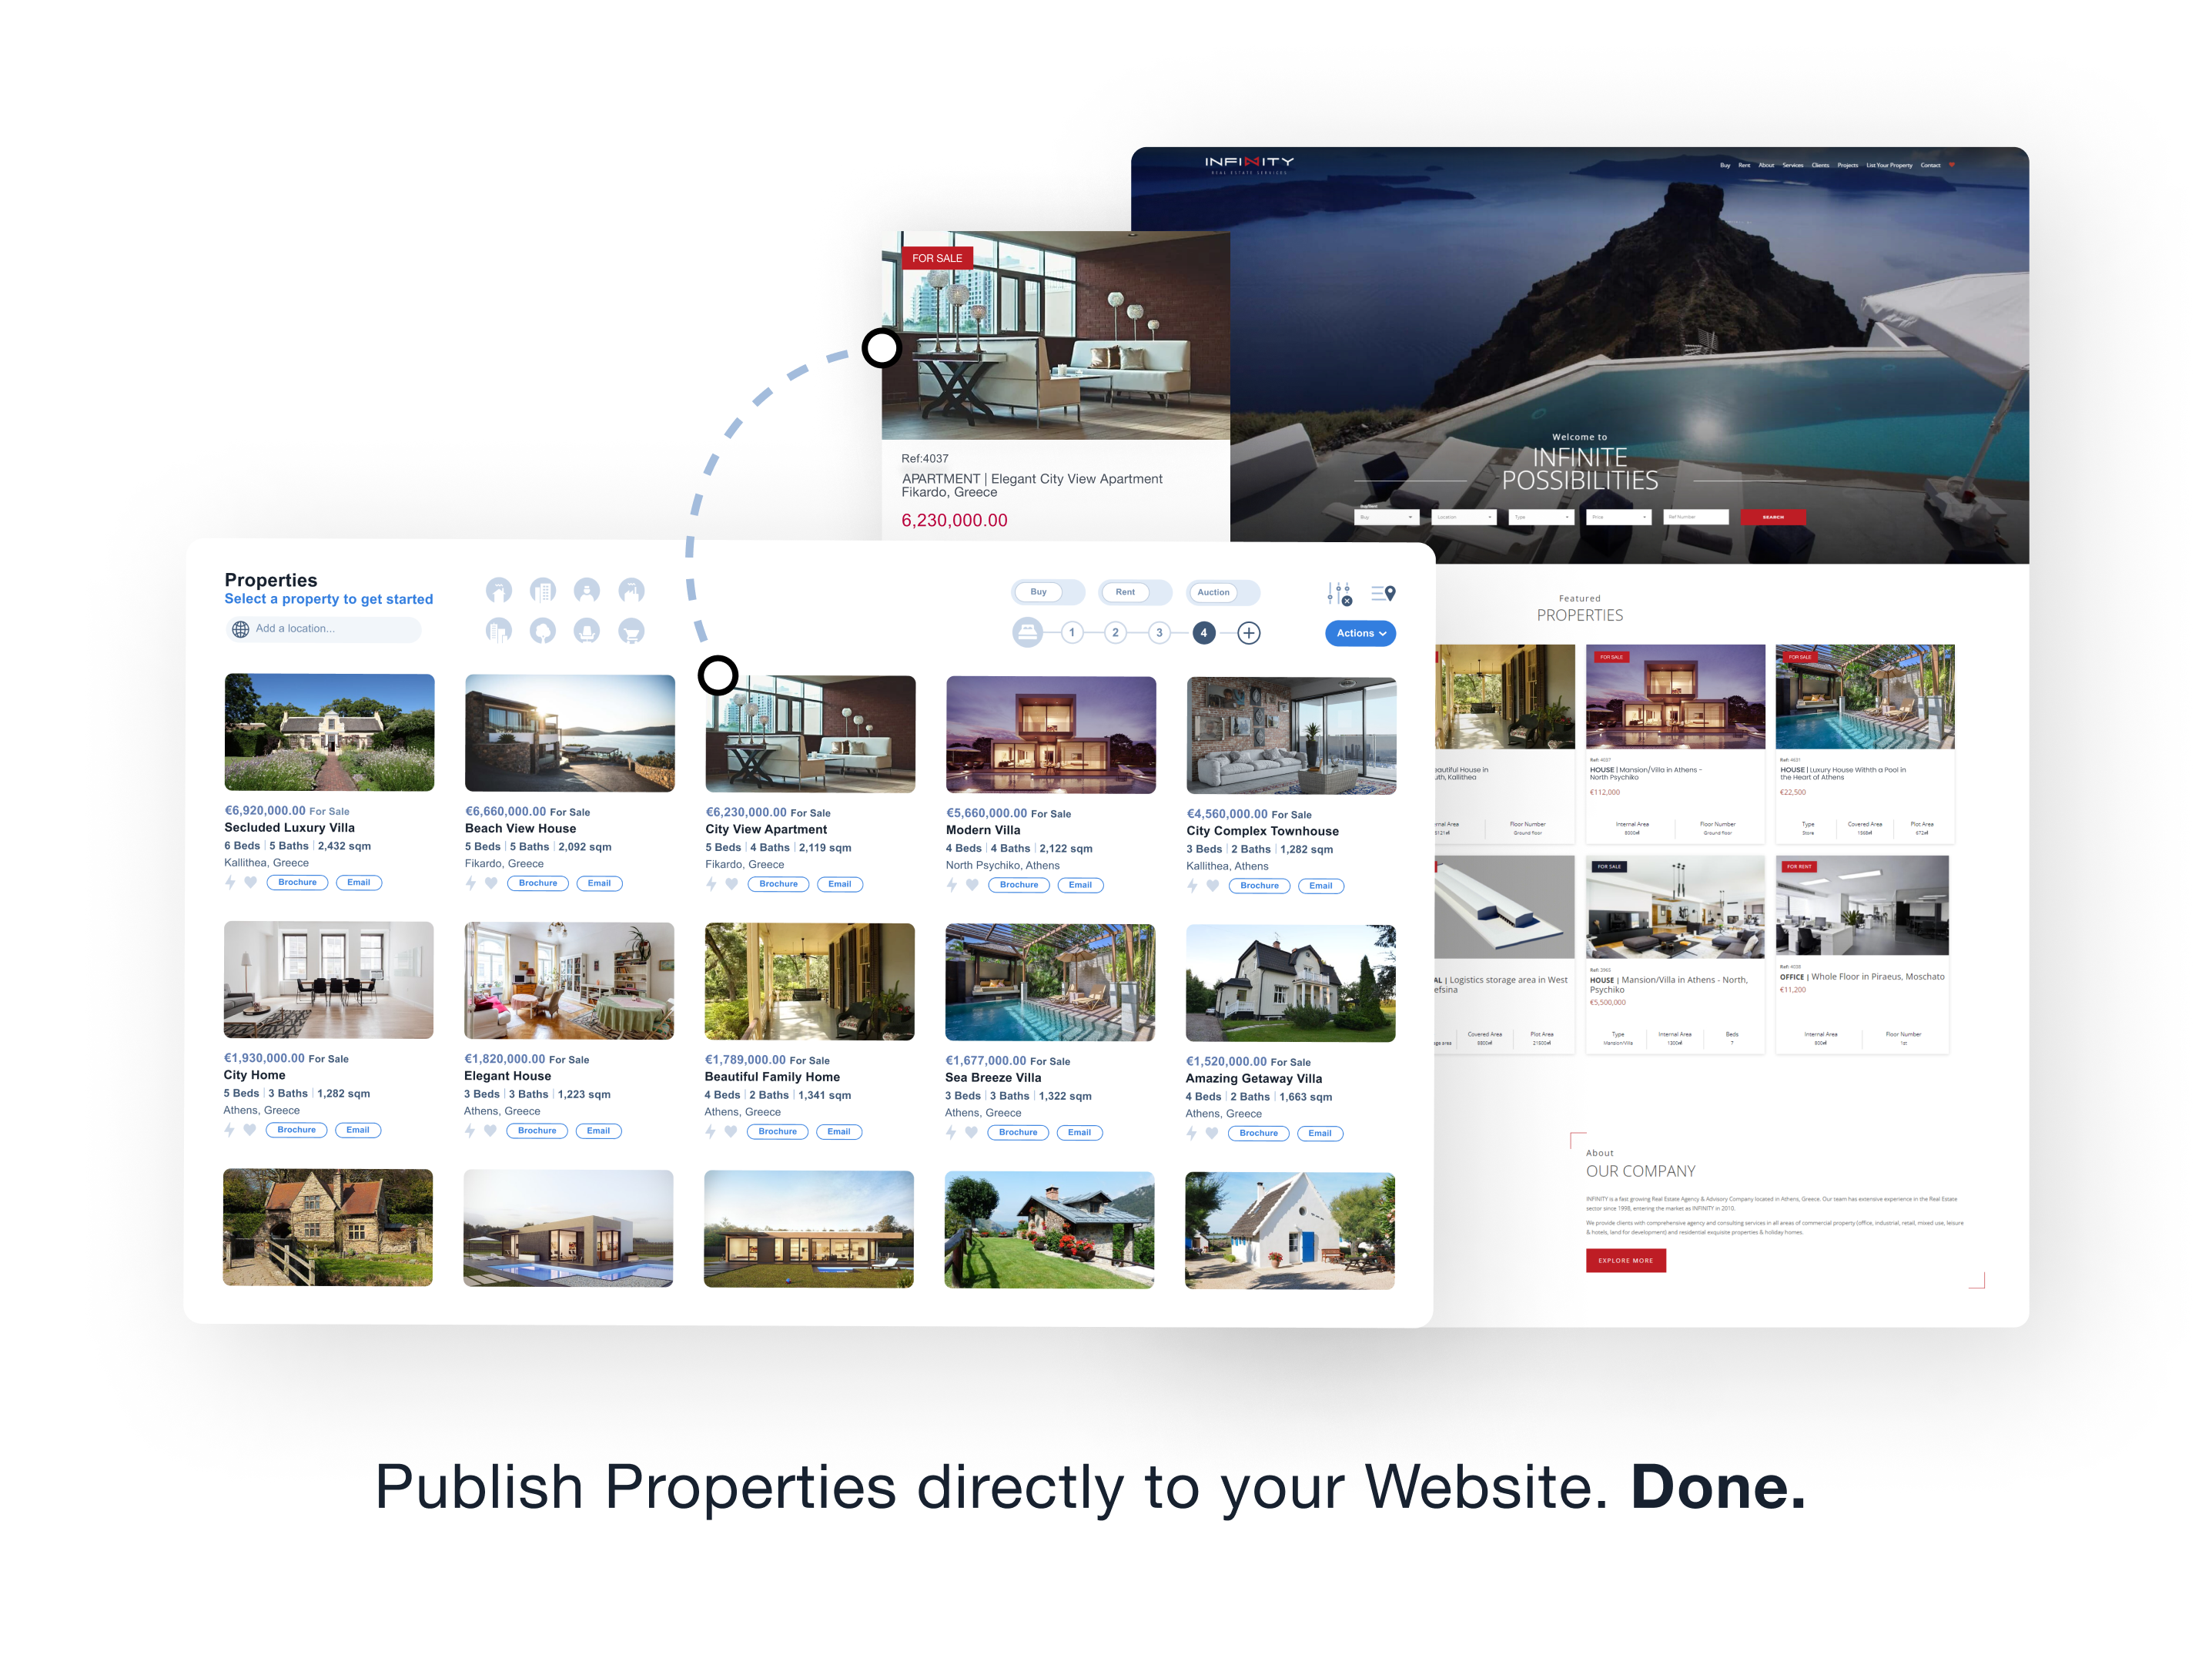 Publishing property listings to your Real Estate website through integration with Qobrix Real Estate CRM